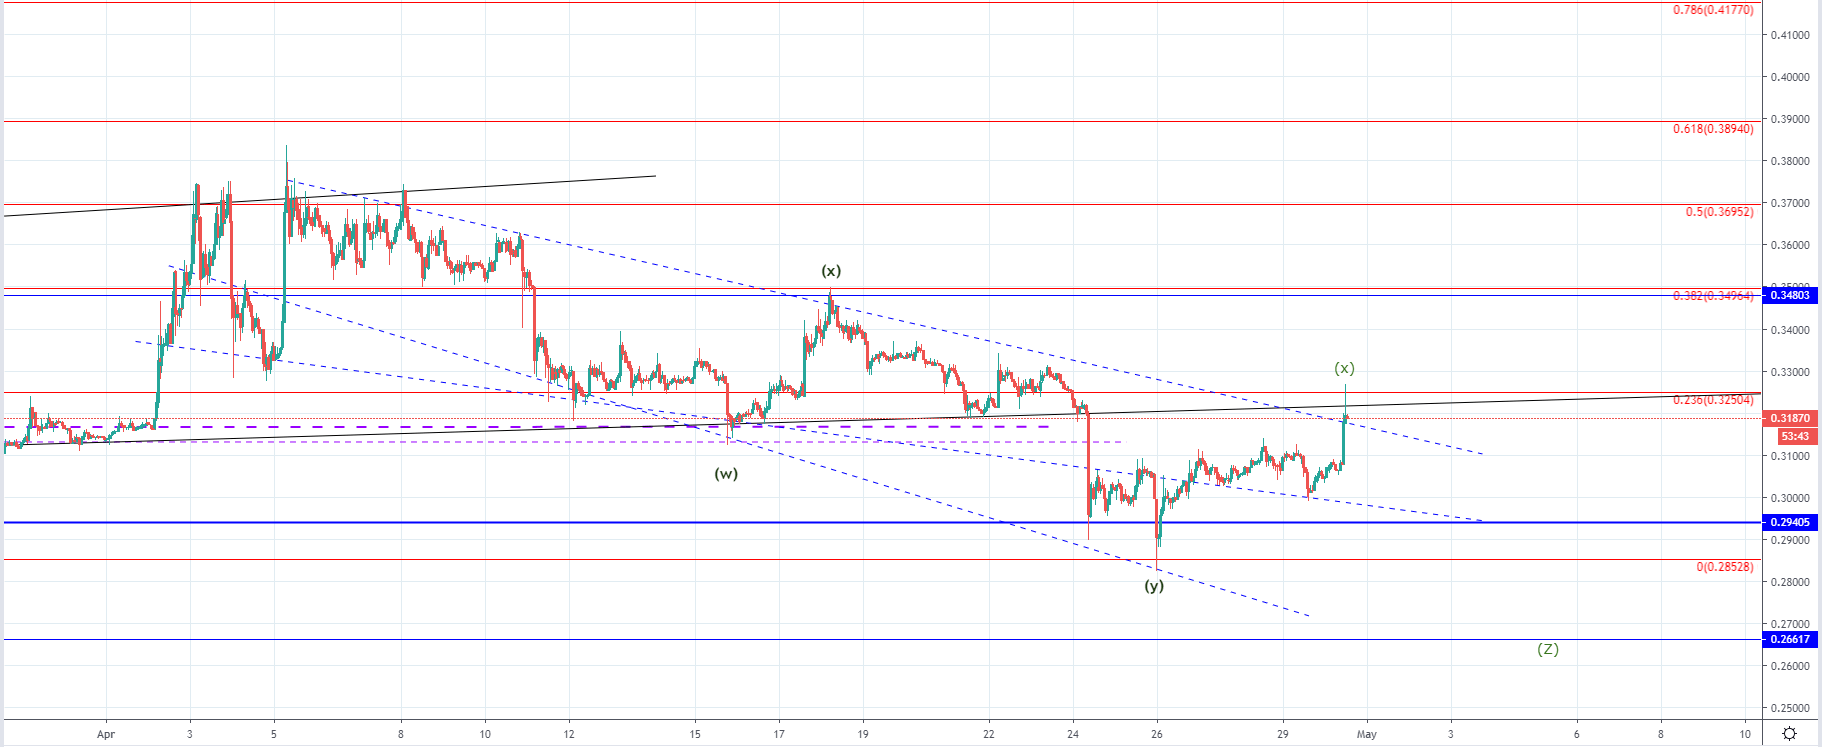 BTC/USD and XRP/USD started recovering